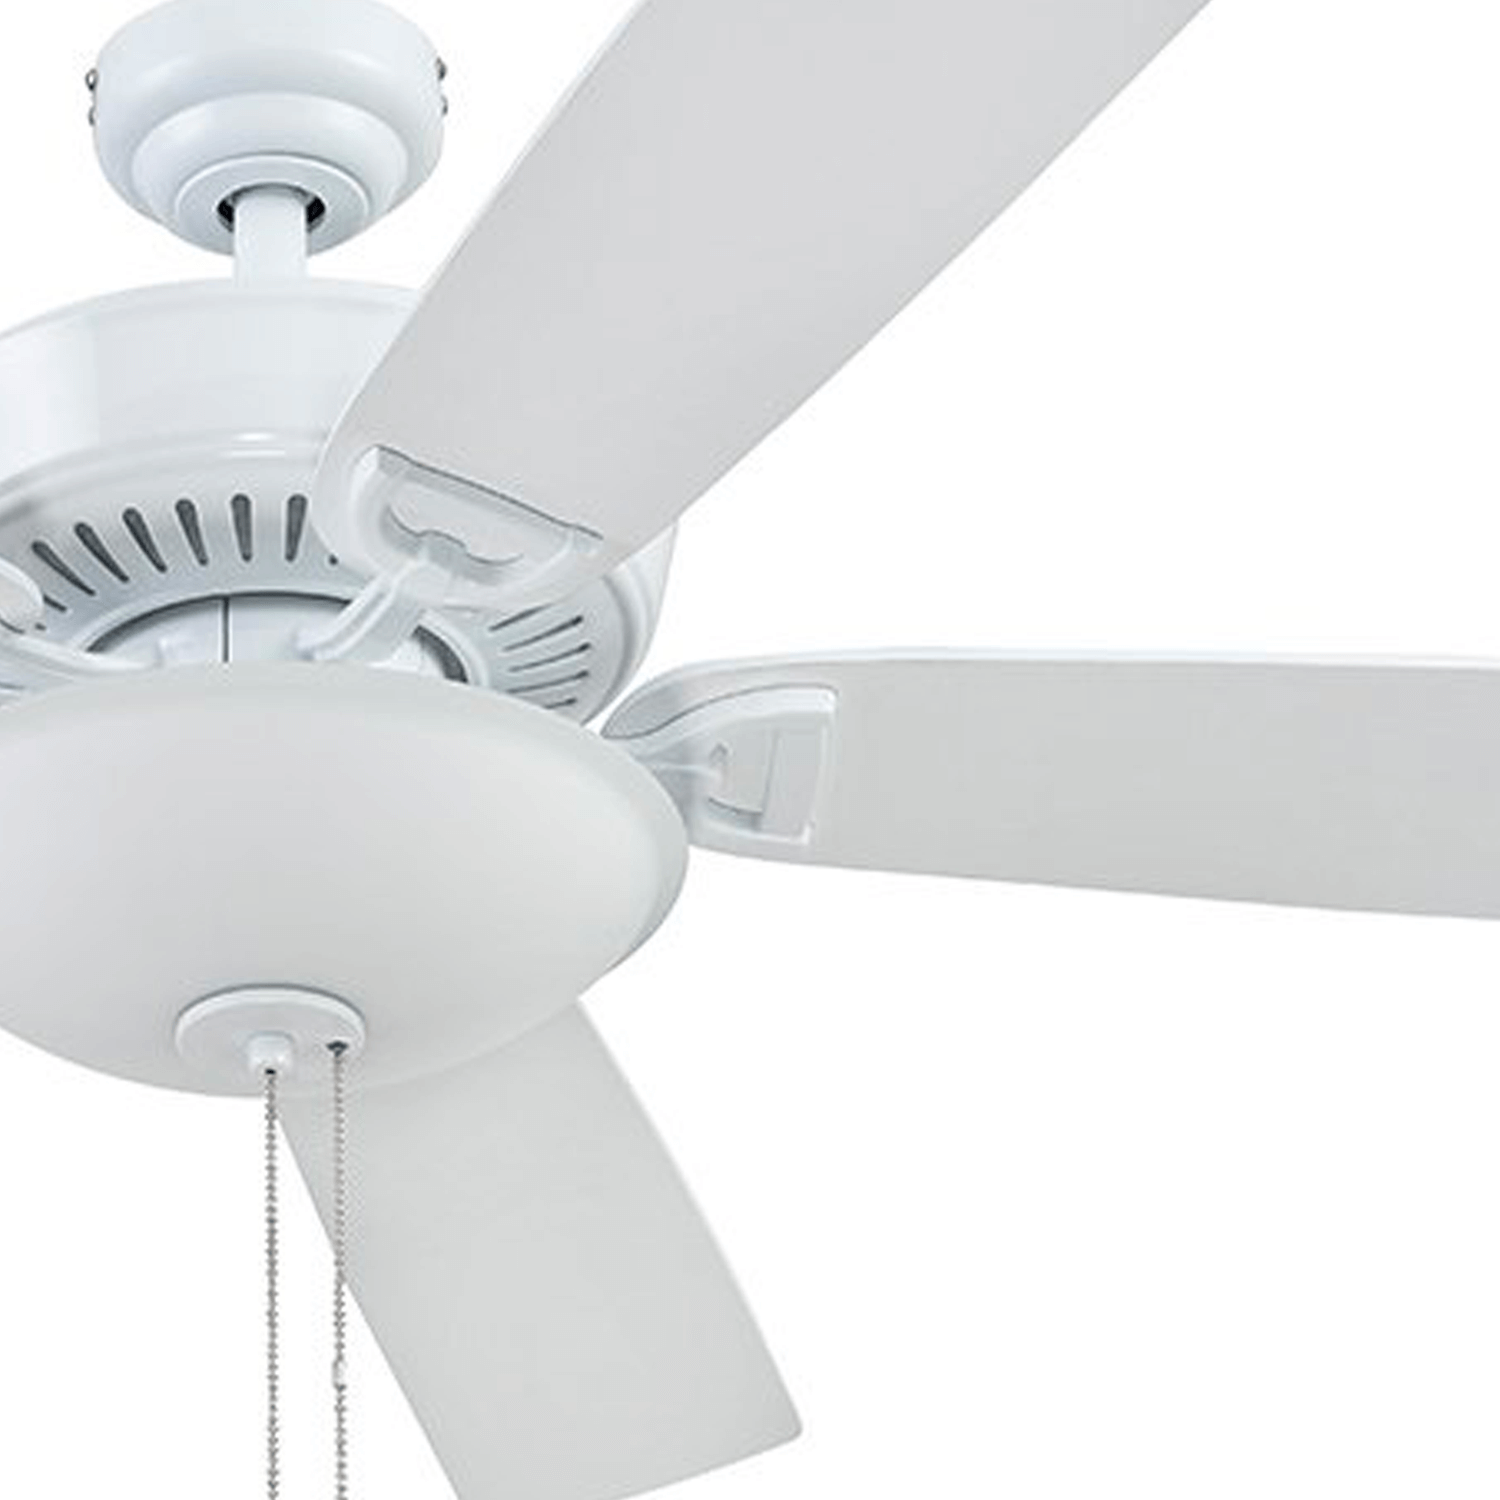 52 Inch Montlake, White, Pull Chain, Ceiling Fan by Prominence Home